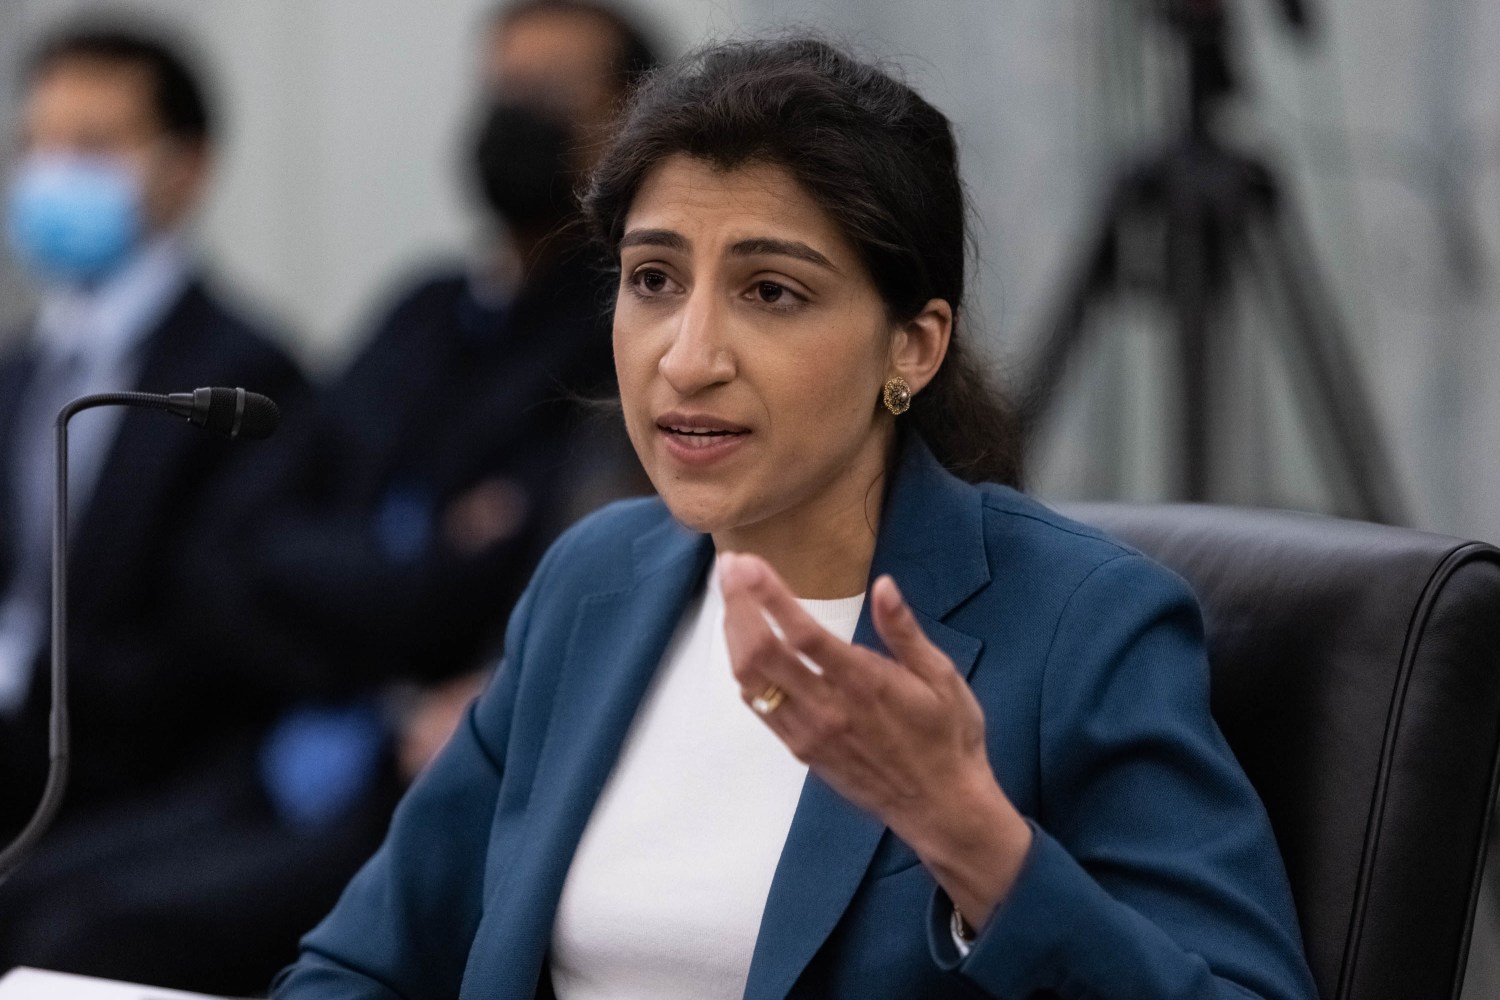 FTC Commissioner nominee Lina M. Khan testifies during a Senate Commerce, Science, and Transportation Committee nomination hearing on Capitol Hill, in Washington, DC on Wednesday, April 21, 2021. (Photo by Pool/Sipa USA)No Use Germany.